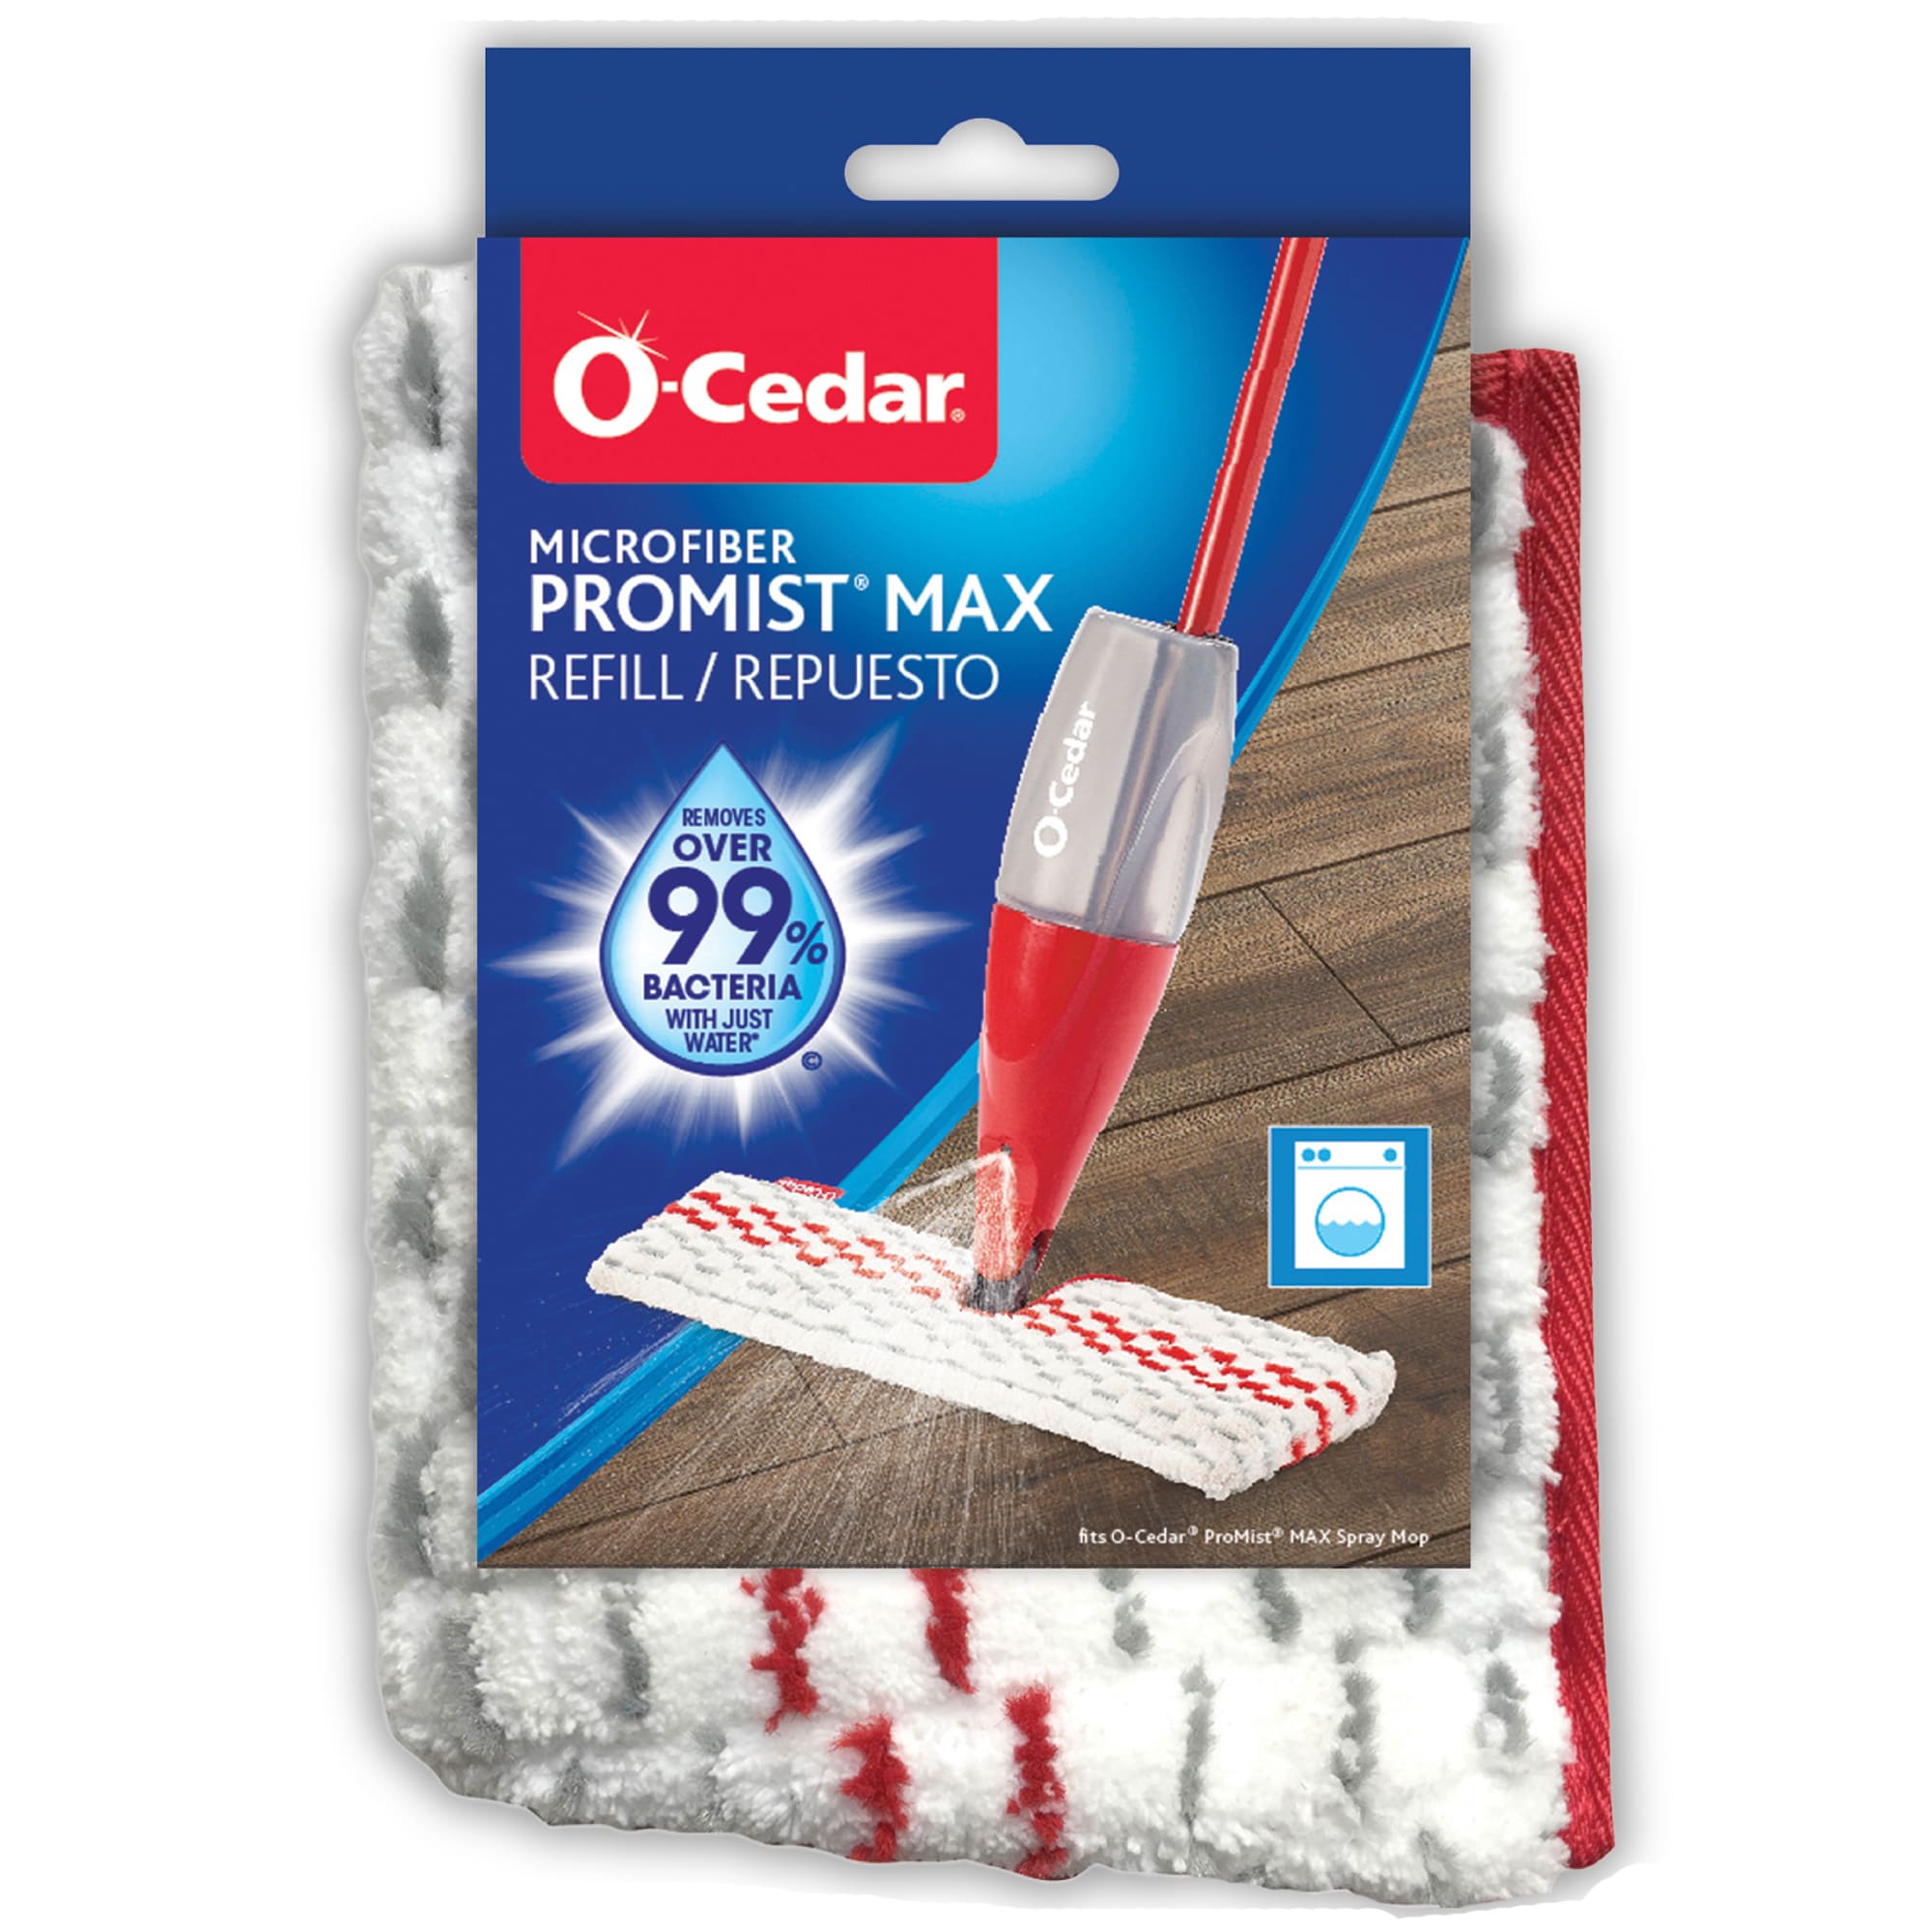  Vileda UltraMax Flat Mop Refill, 1 Count (Pack of 1), White/Red  : Home & Kitchen